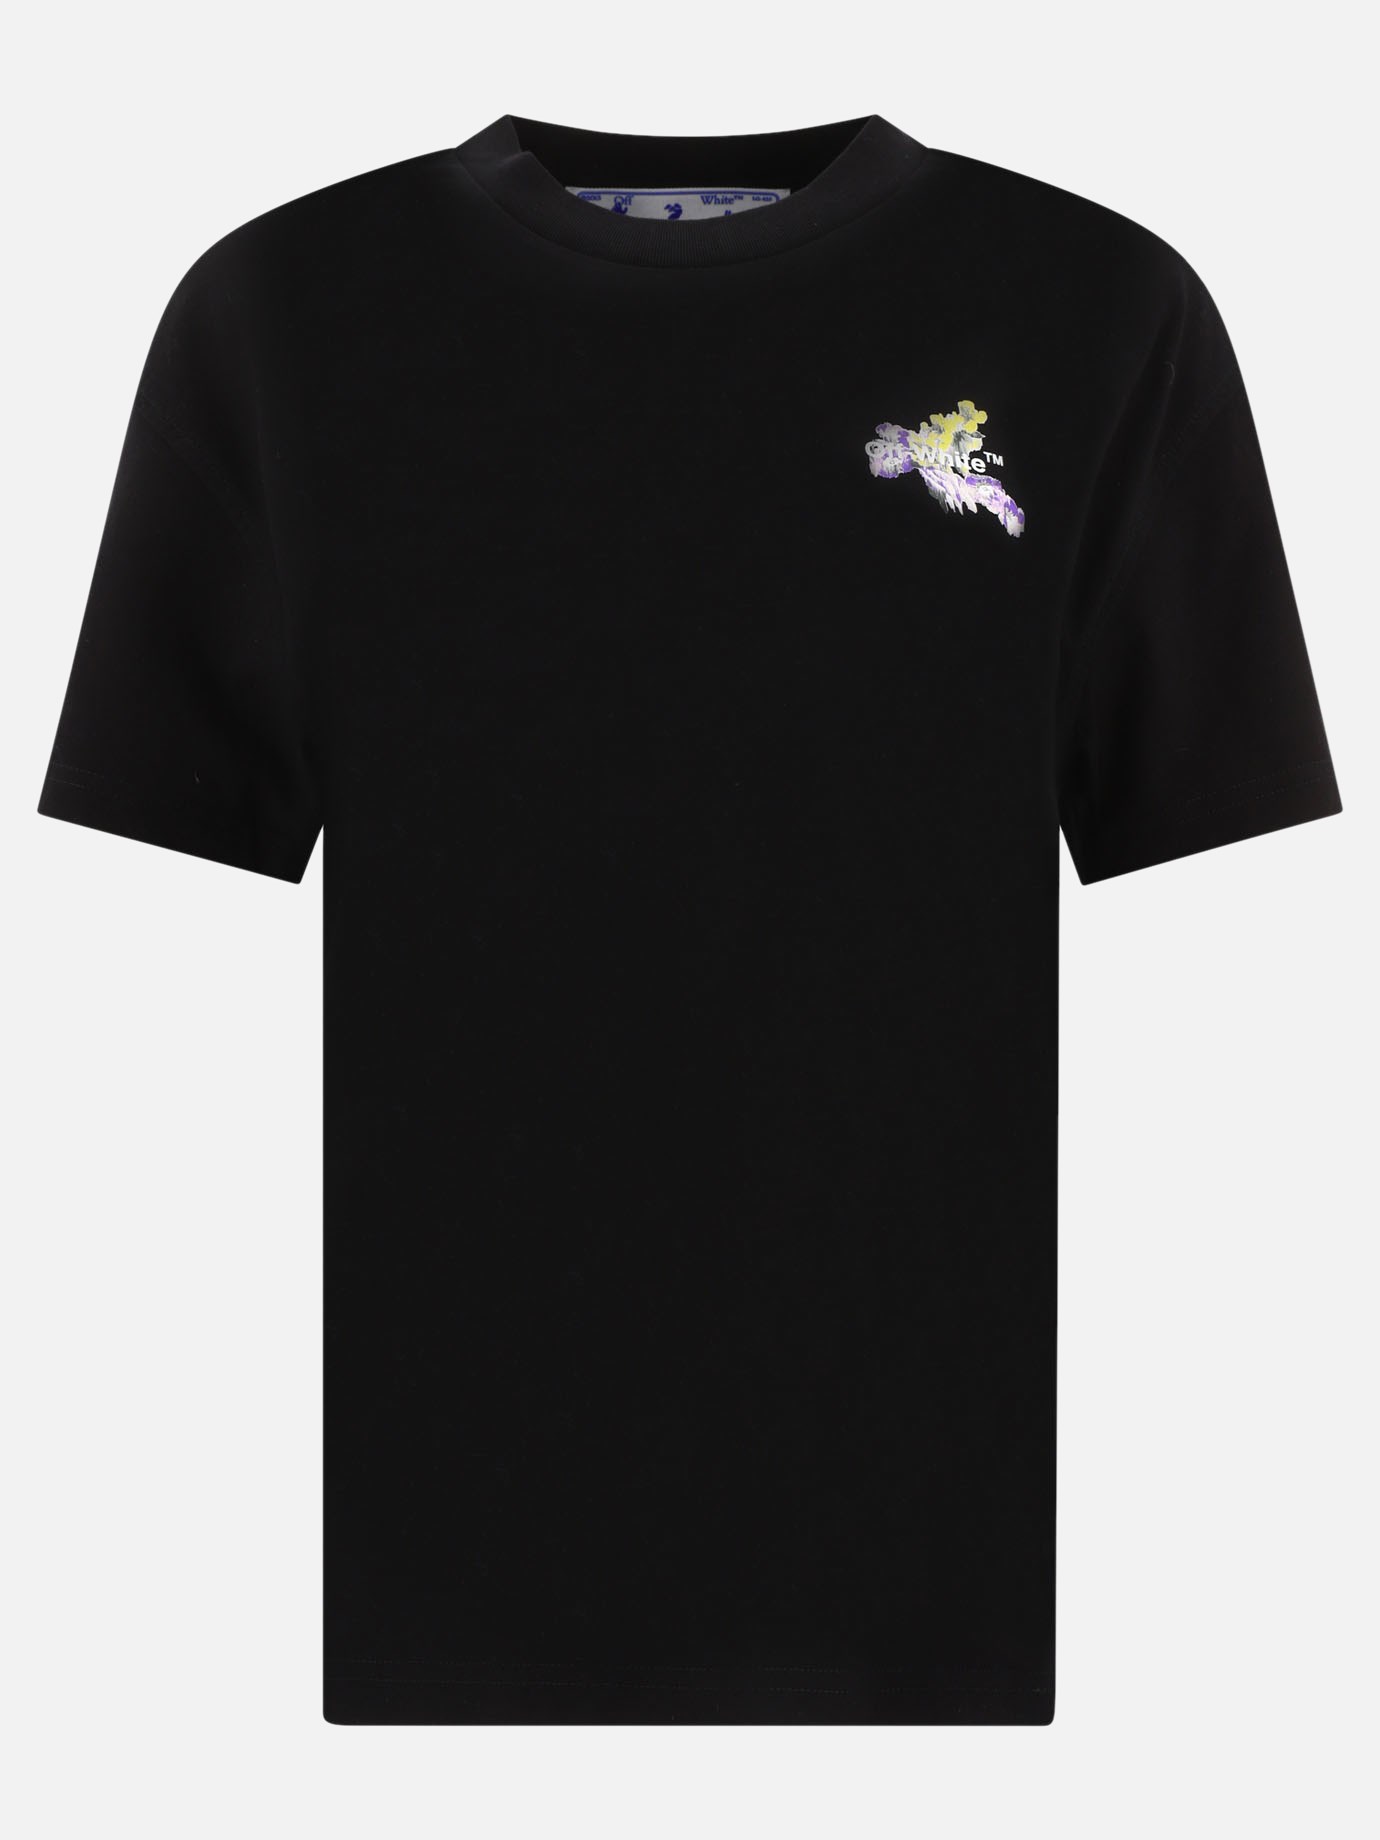  Flowers Arrow  t-shirtby Off-White - 2